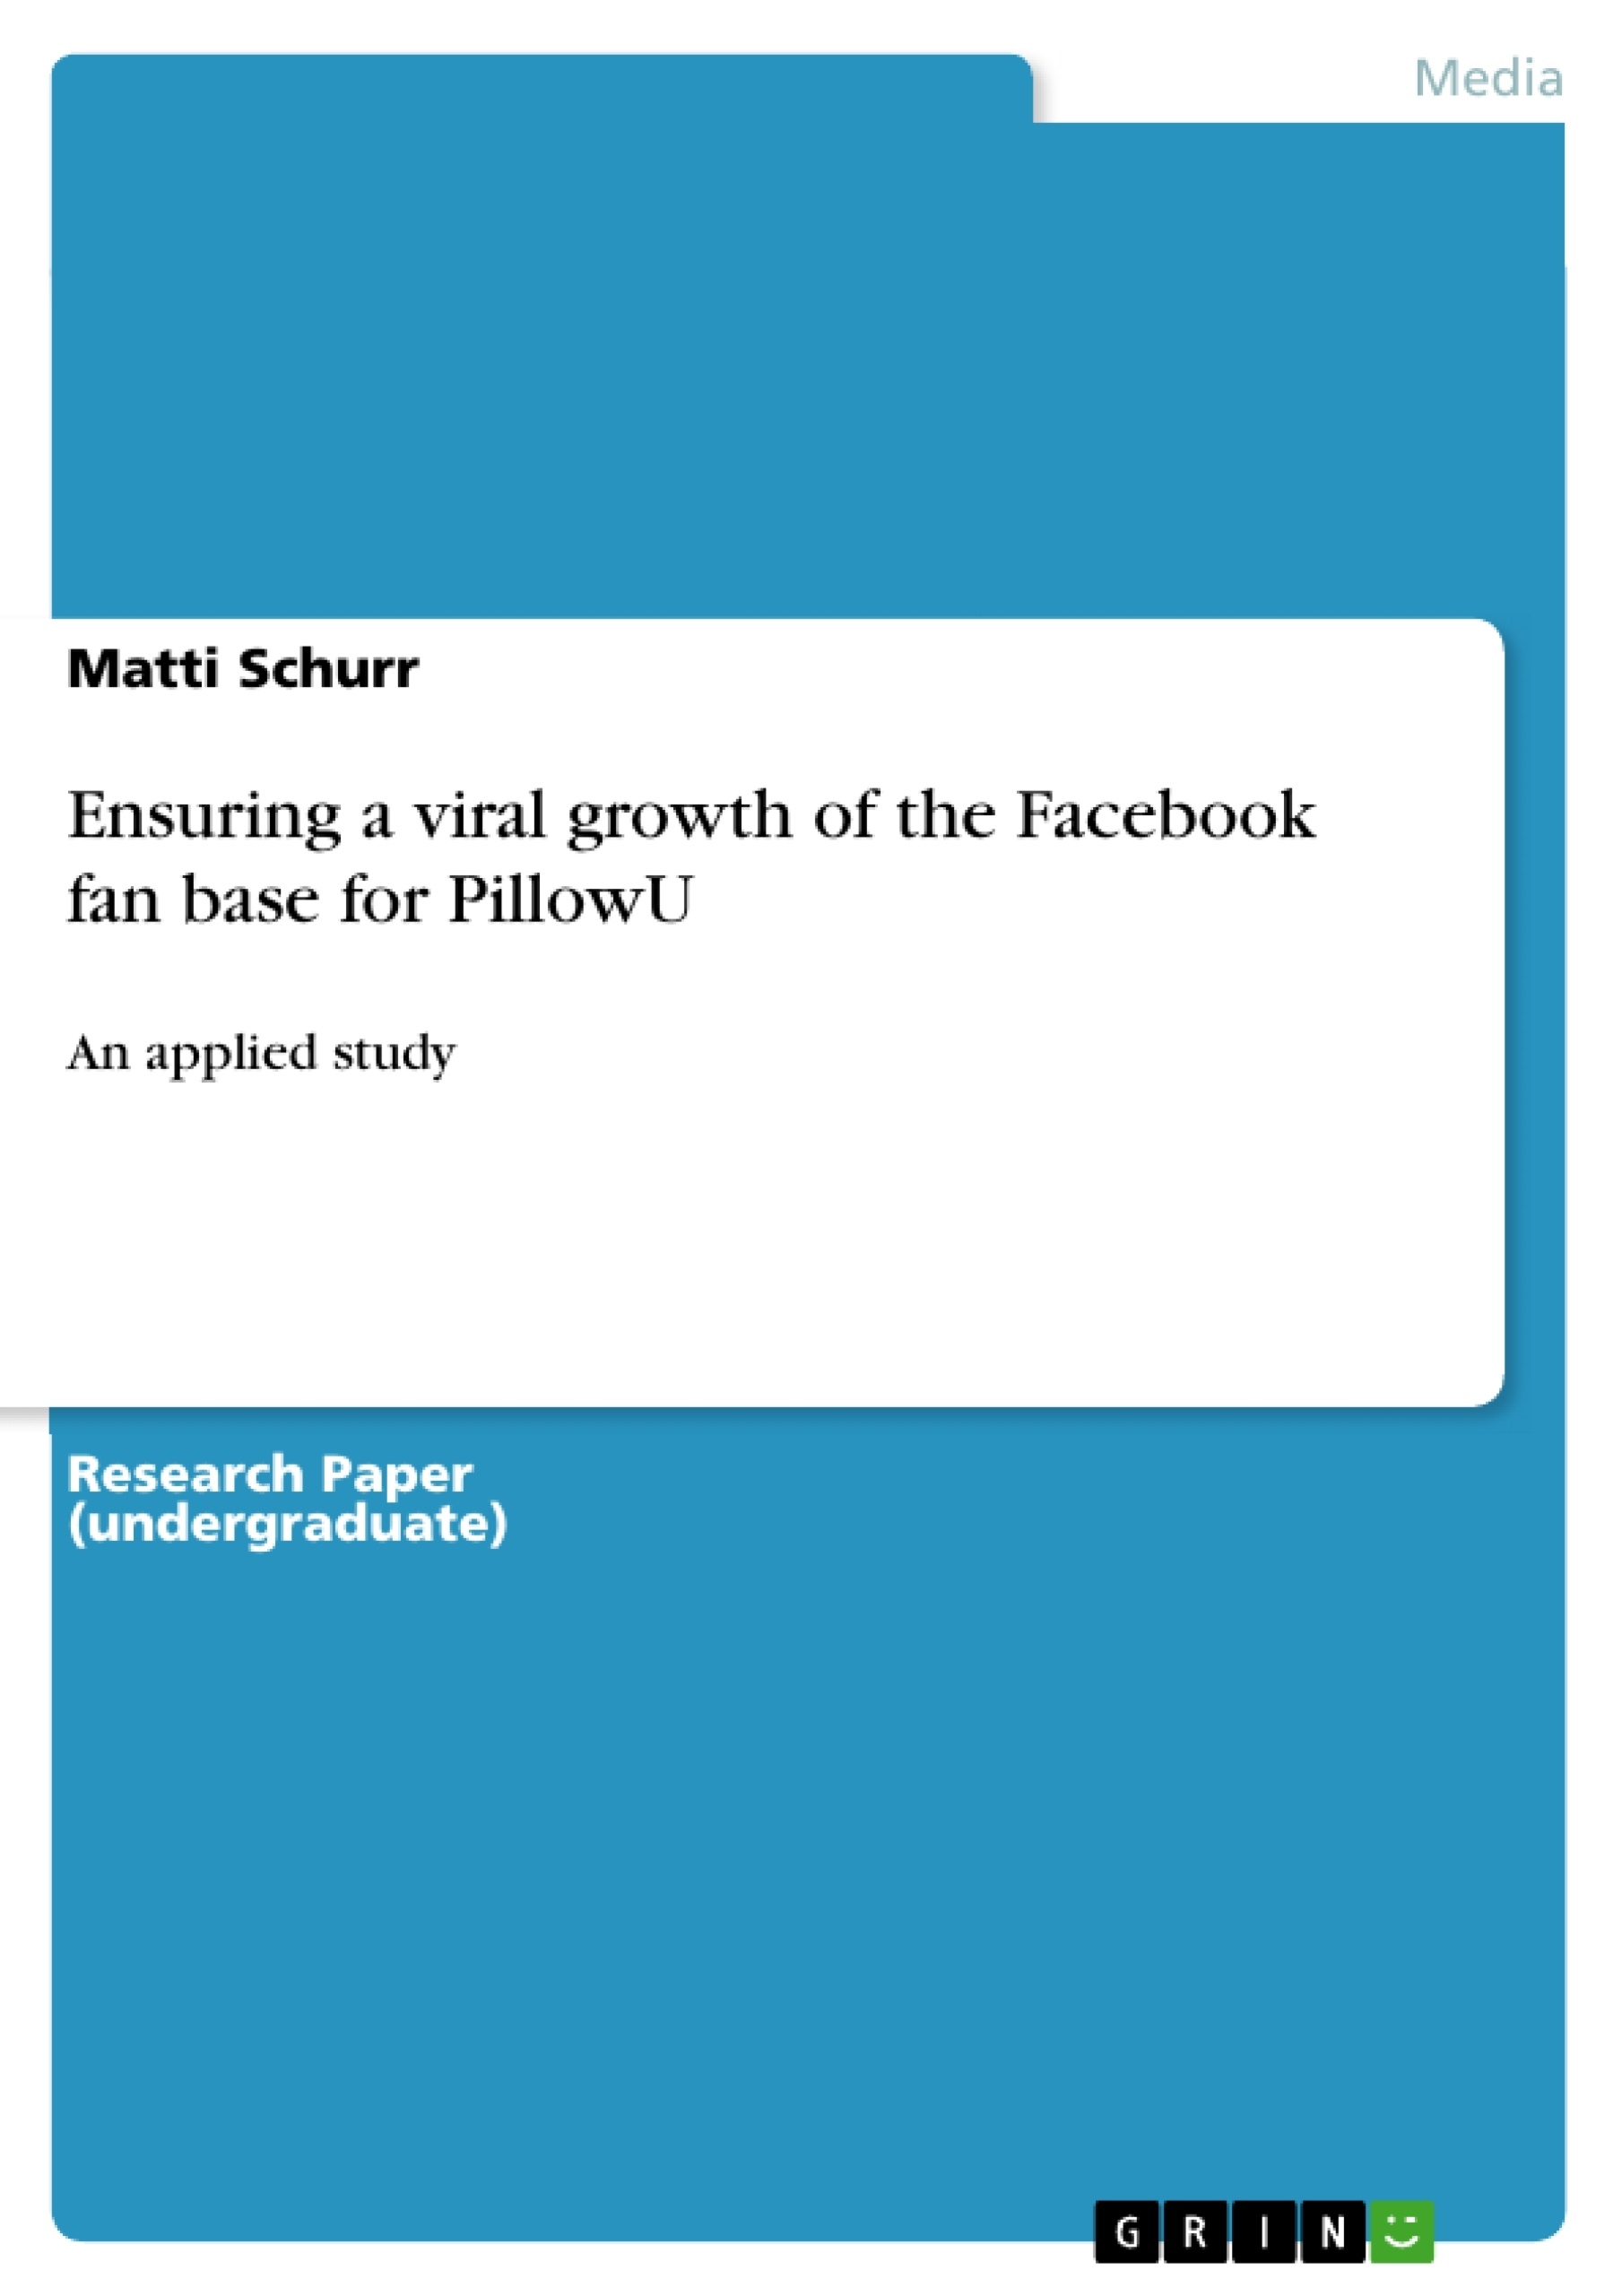 Title: Ensuring a viral growth of the Facebook fan base for PillowU